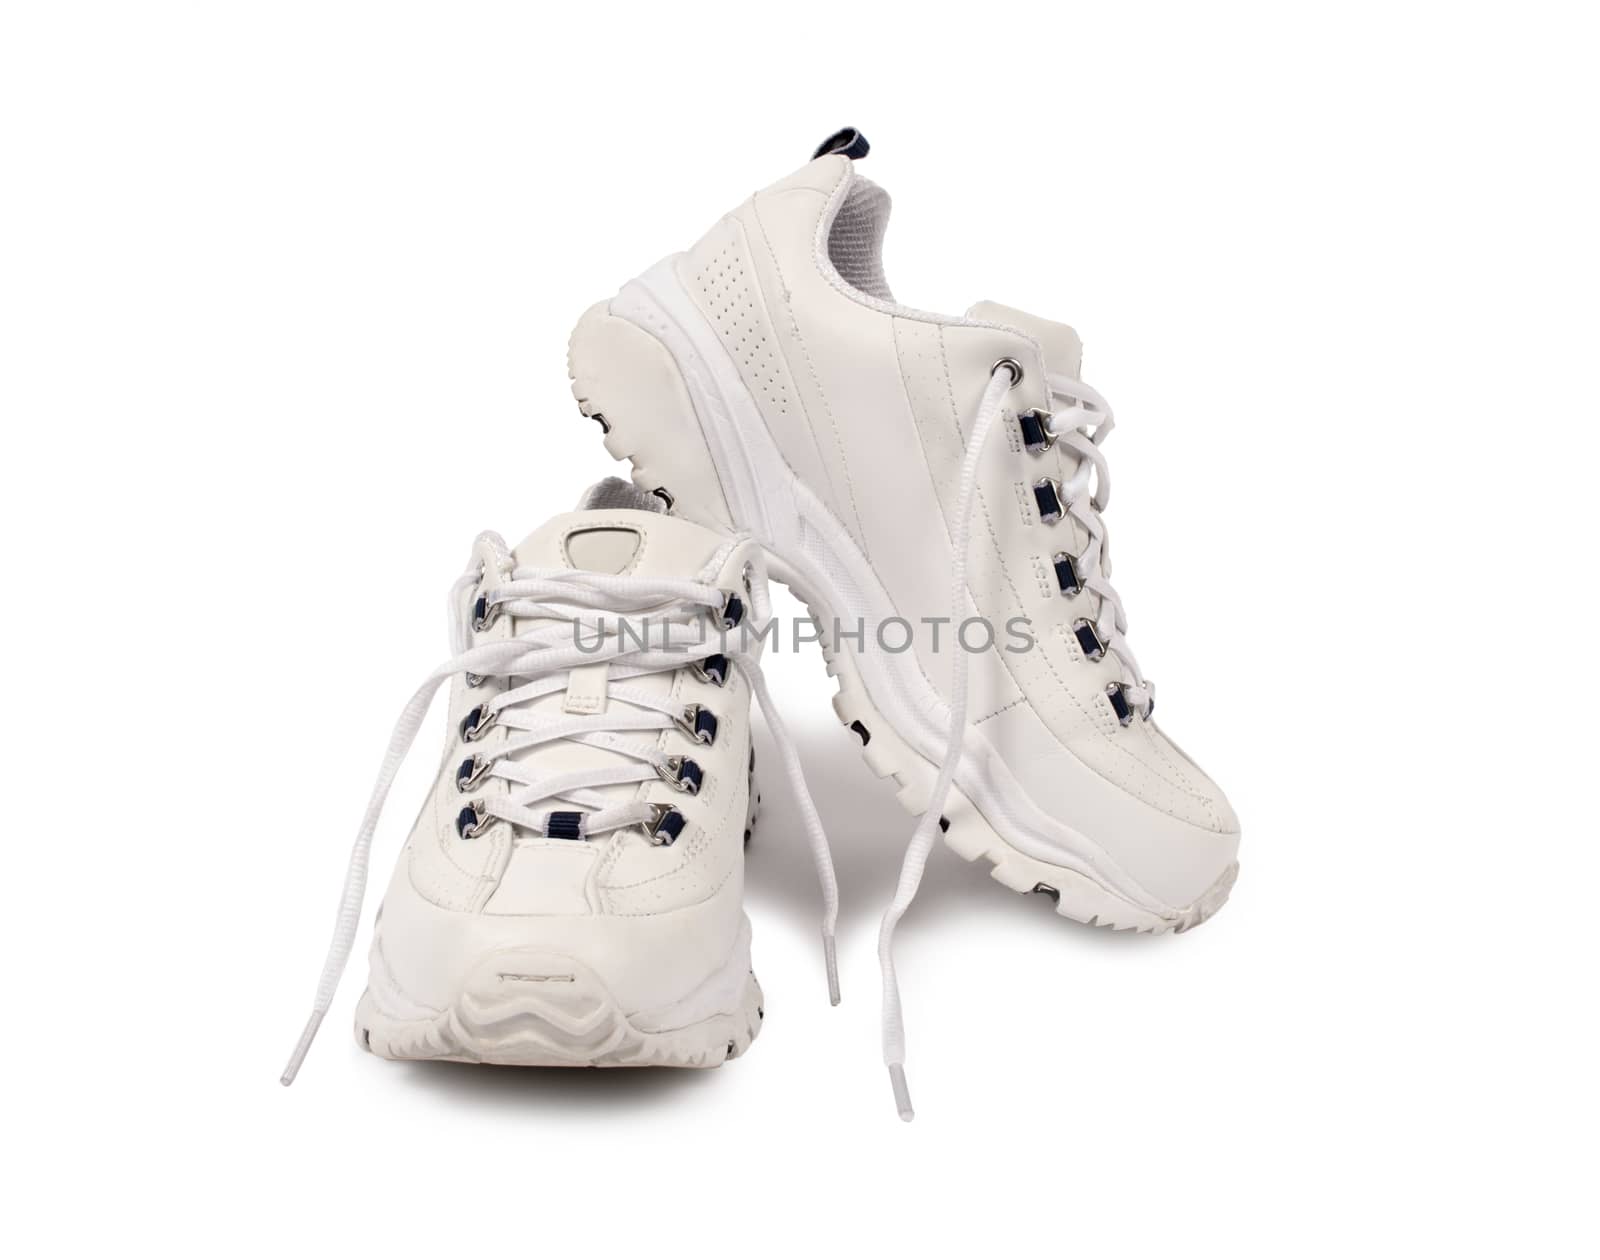 Sport running shoes isolated on a white background